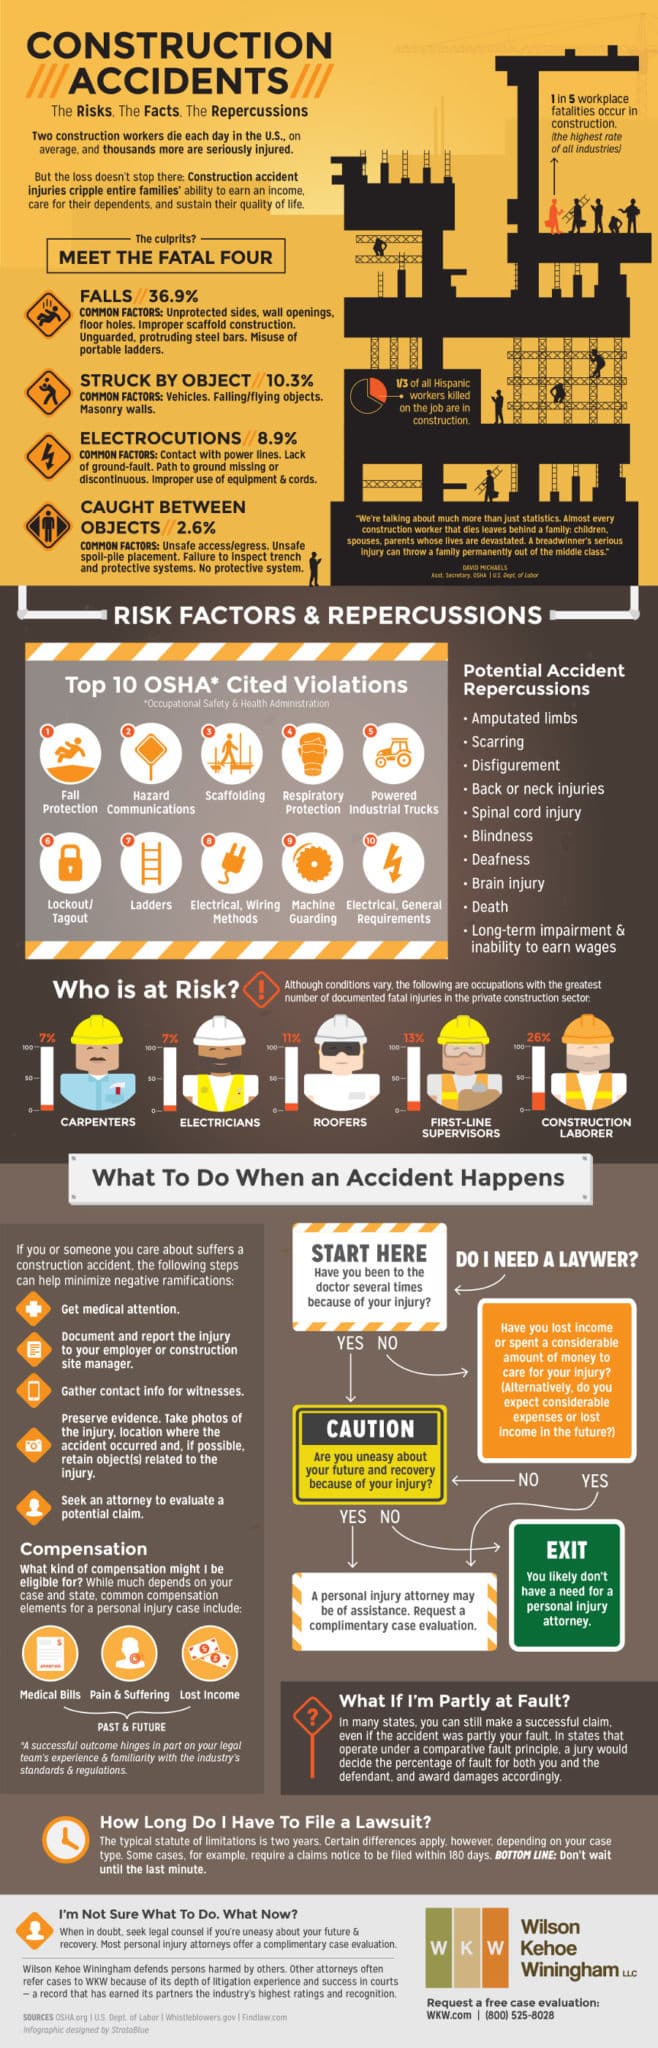 Construction Accidents: The Risks, the Facts, and the Repercussions